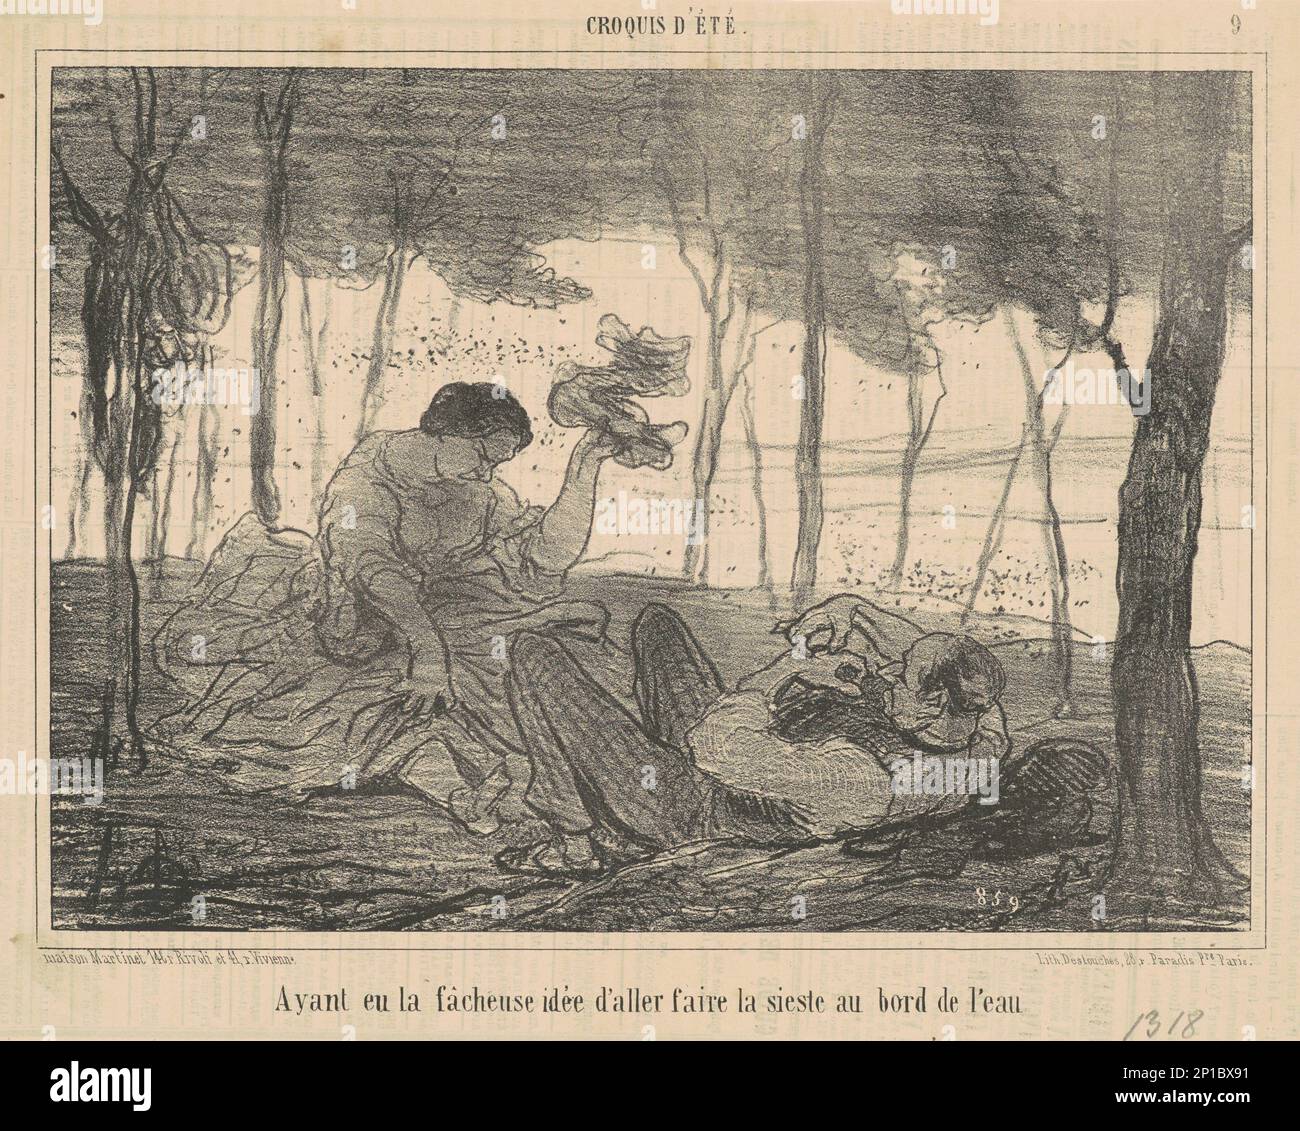 Ayant eu la facheuse id&#xe9;e d'aller faire la sieste au bord de l'eau, 19th century. Summer. (Couple irritated by biting insects). Bad idea to go and have a siesta by the water. Stock Photo